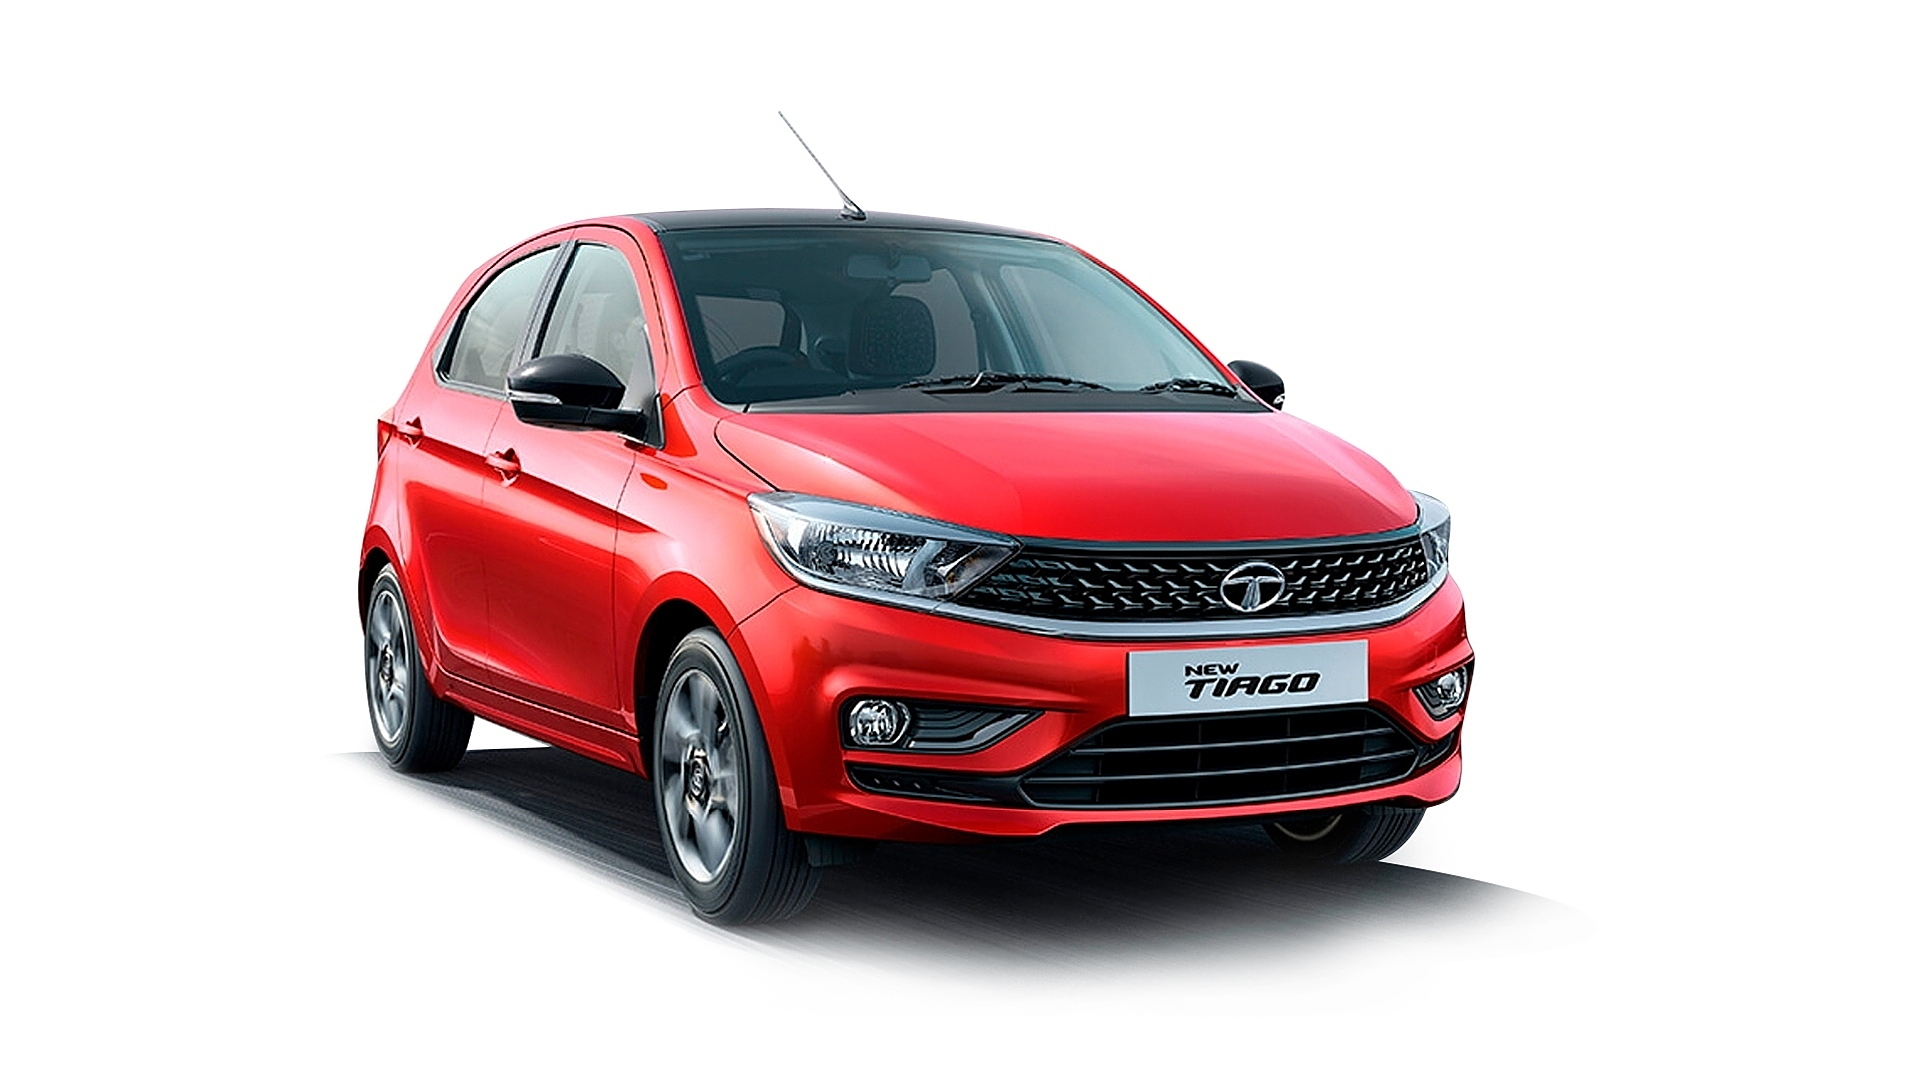 Tata Tiago will be most affordable electric car